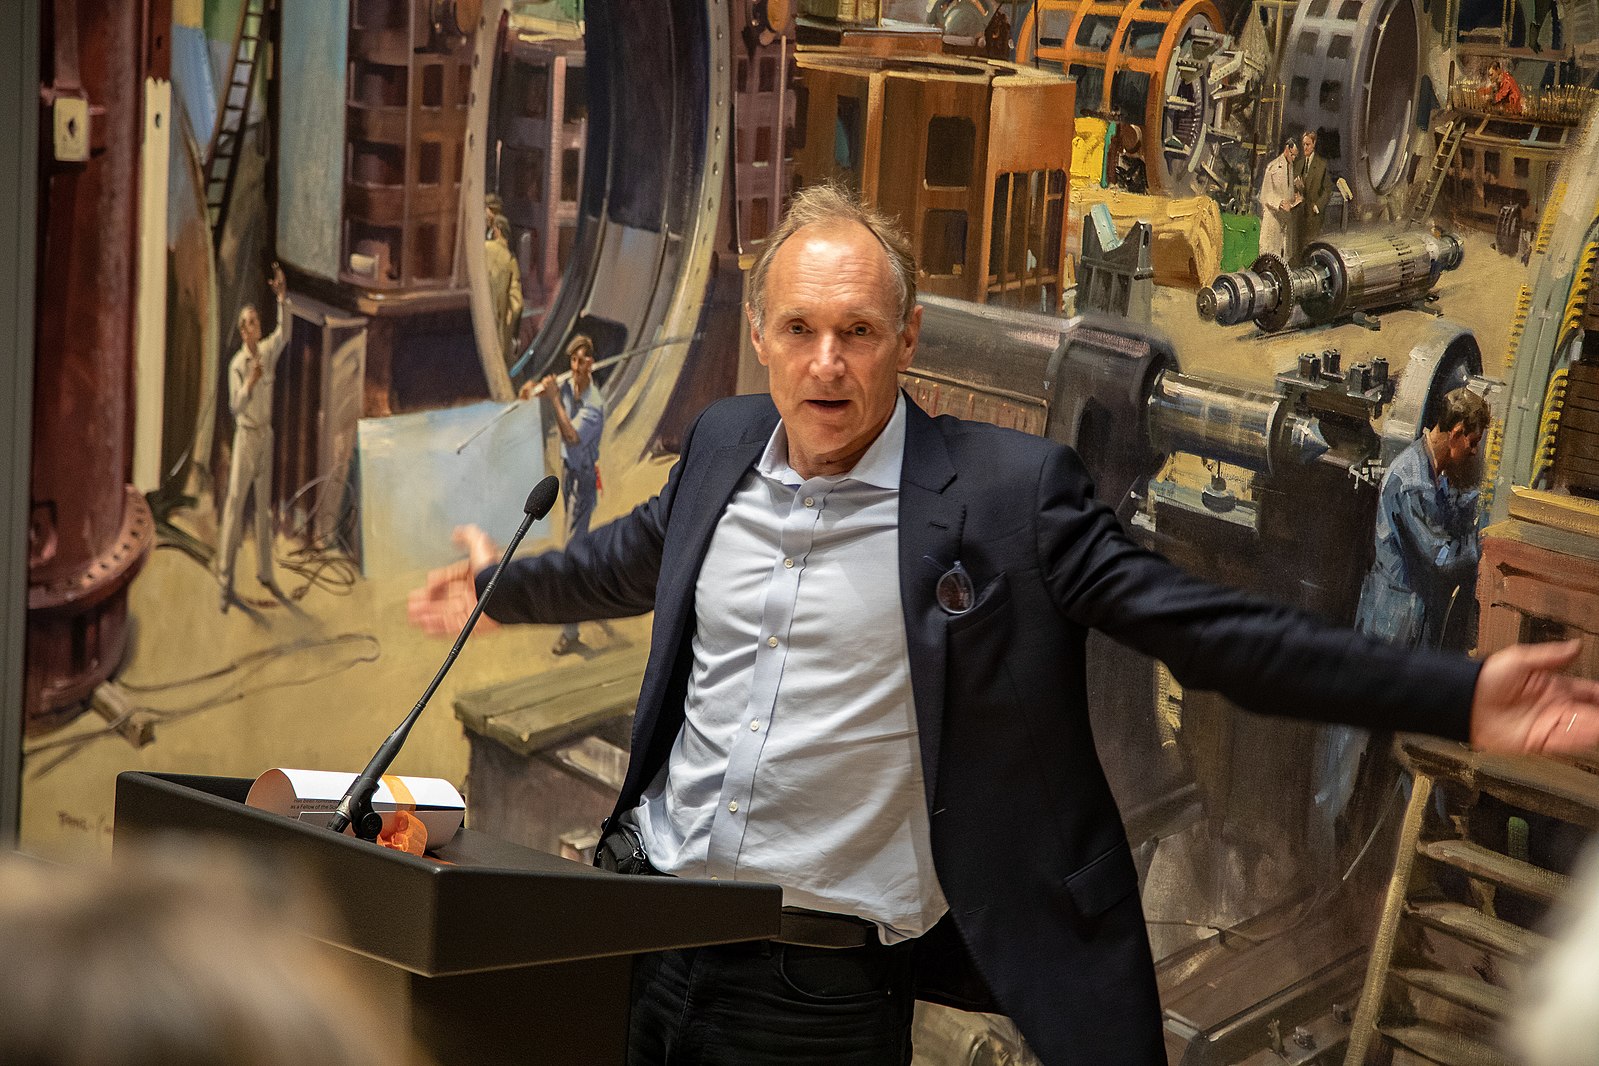 Photo  - (Turing Lecture TBL)of Tim Berners-Lee Creative Commons JwsLubbock https://upload.wikimedia.org/wikipedia/commons/d/d6/At_the_Science_Museum_for_the_Web%4030_event%2C_March_2019_23.jpg